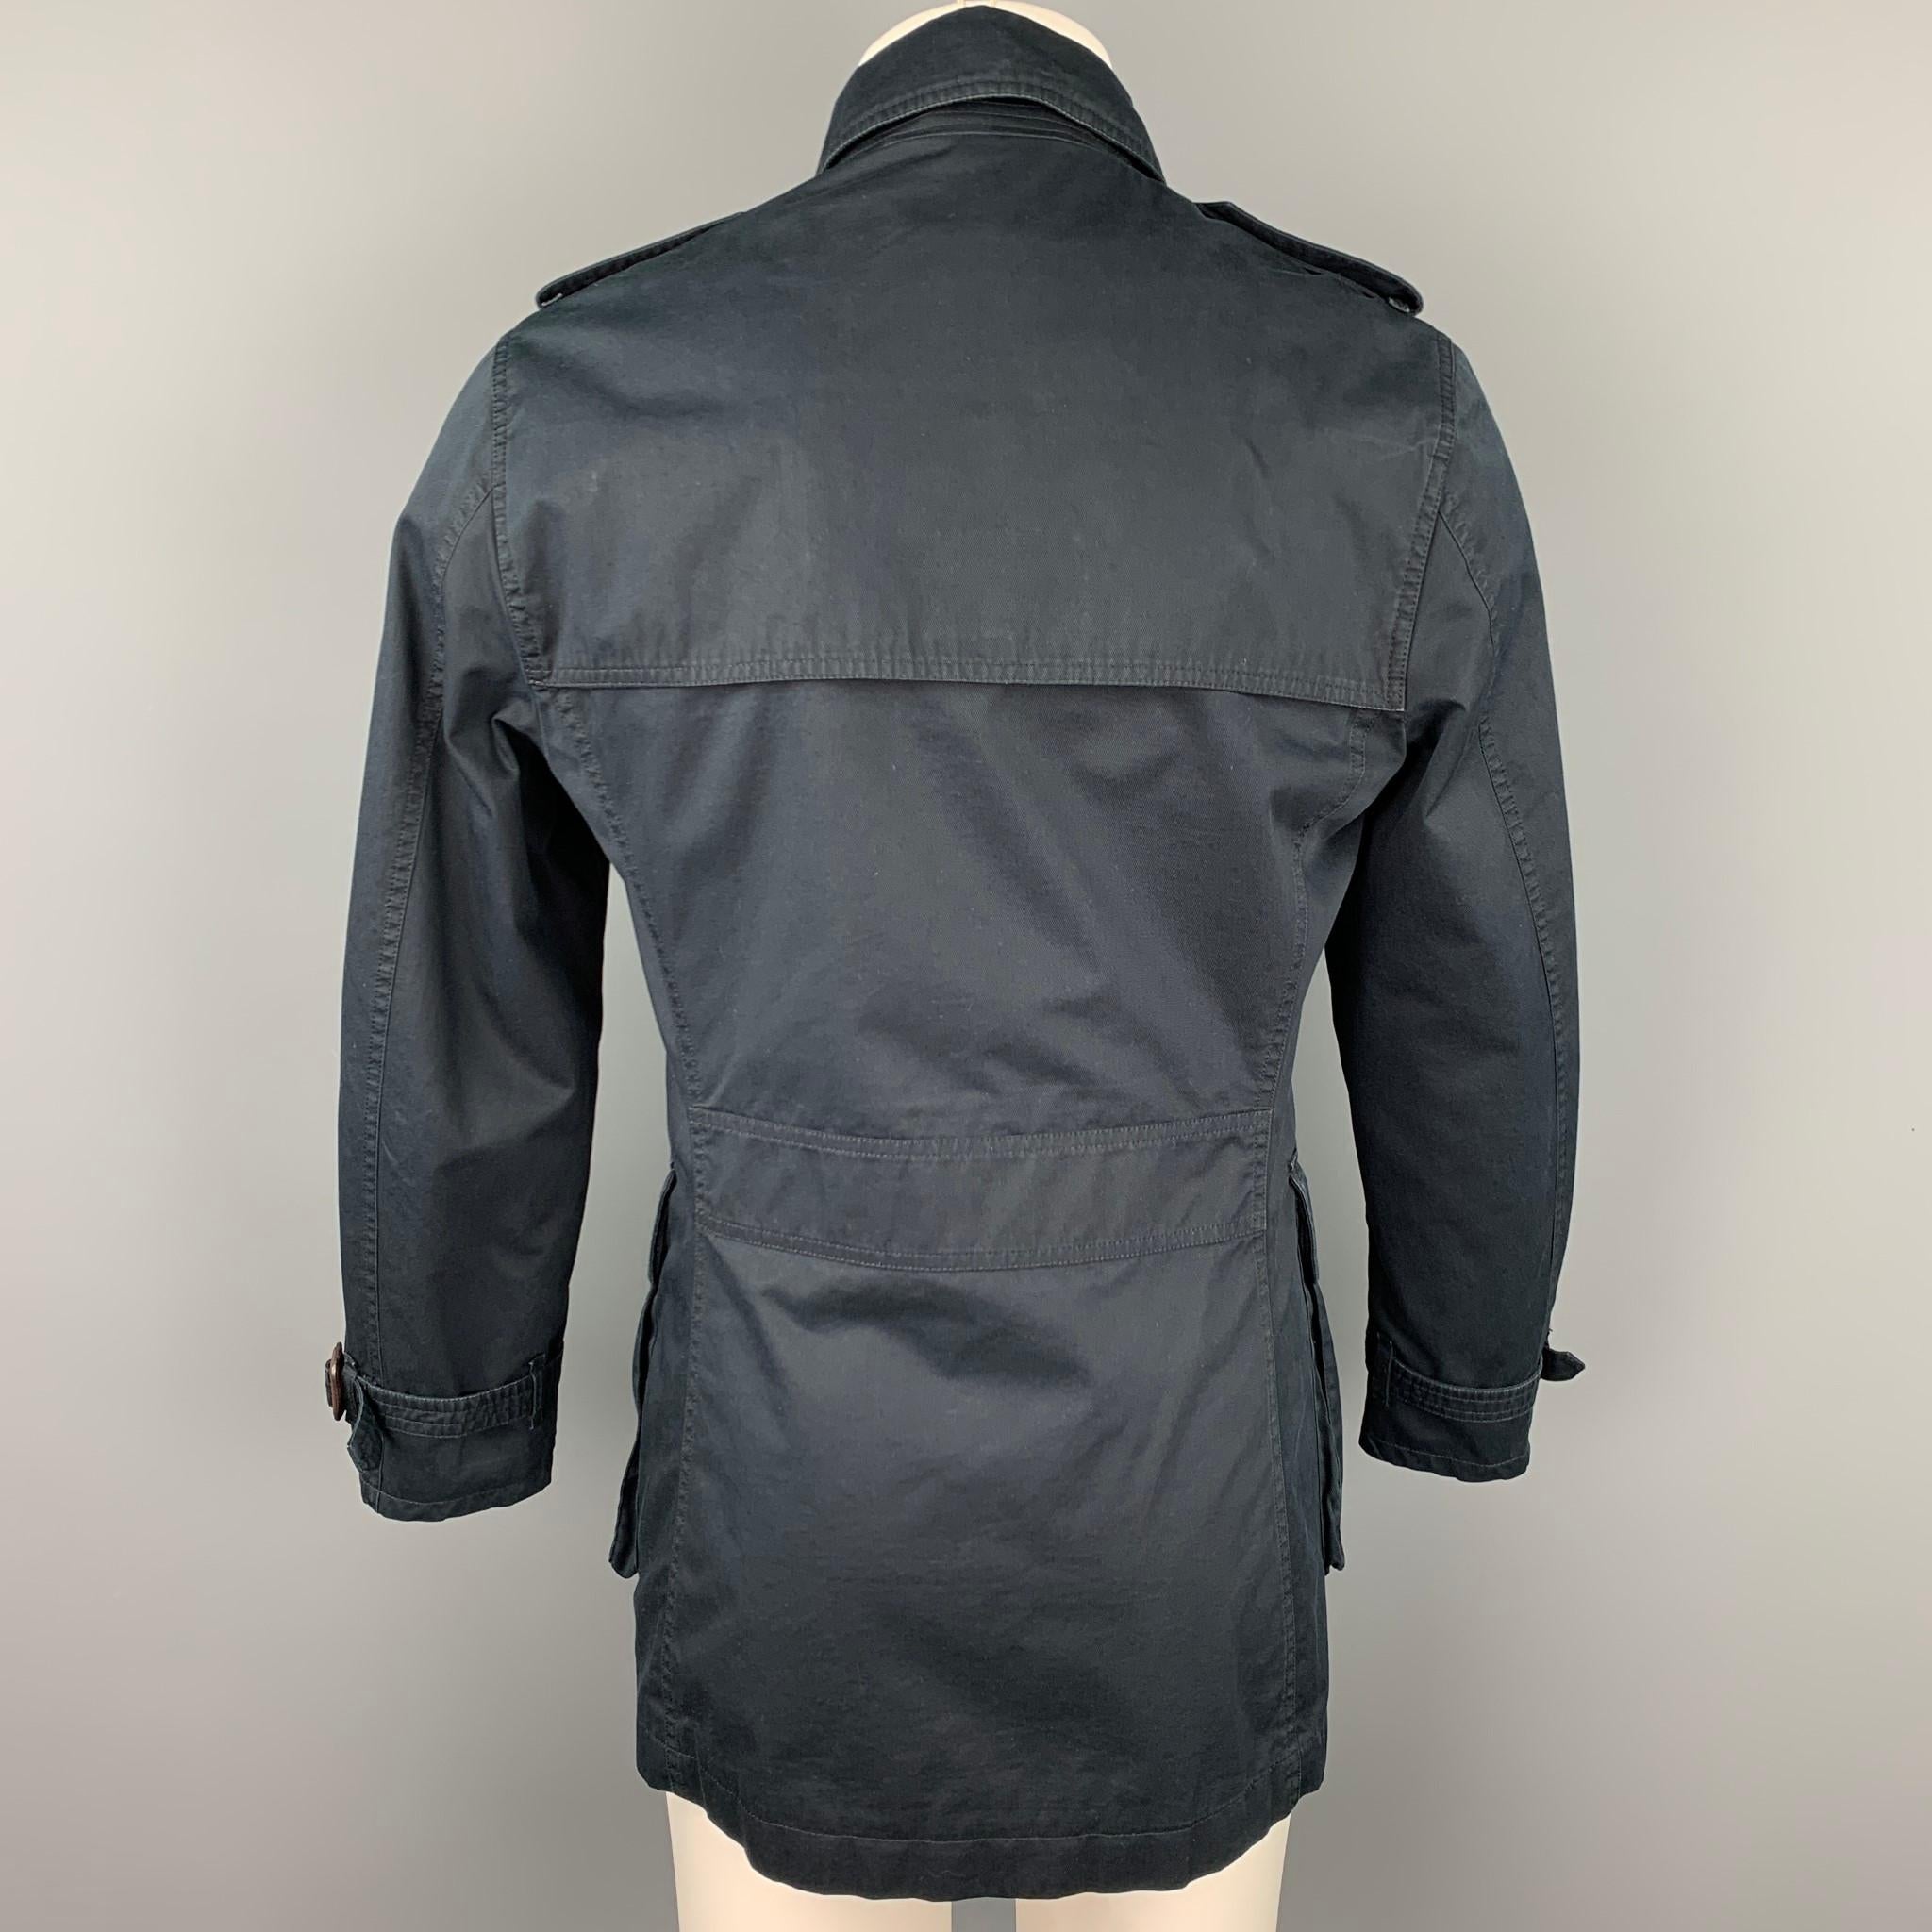 burberry double breasted jacket navy